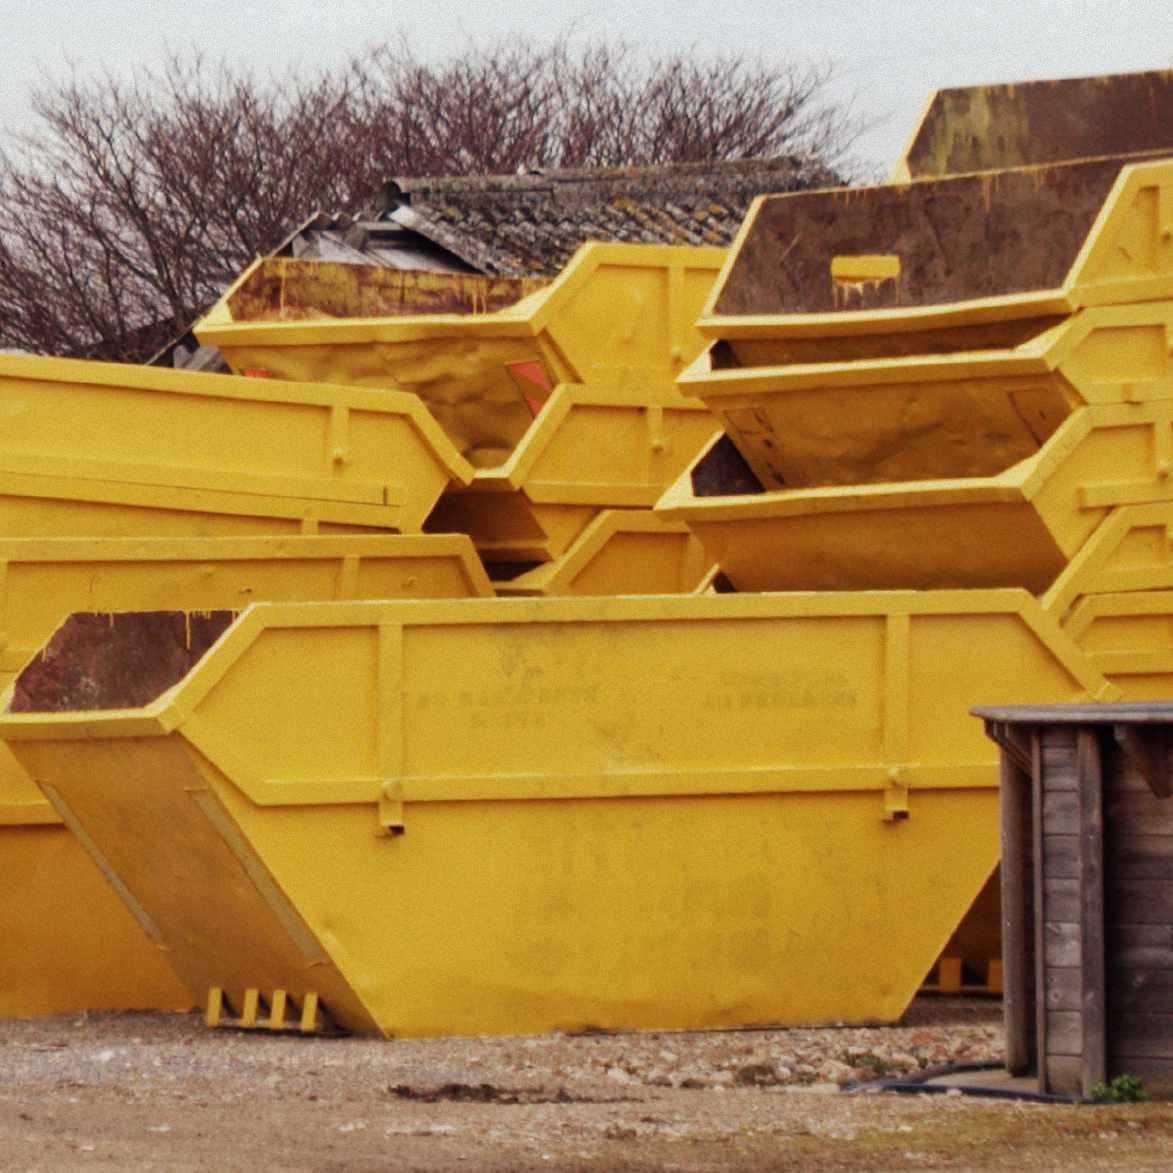 several yellow skips packed on top of each other in a waste field.